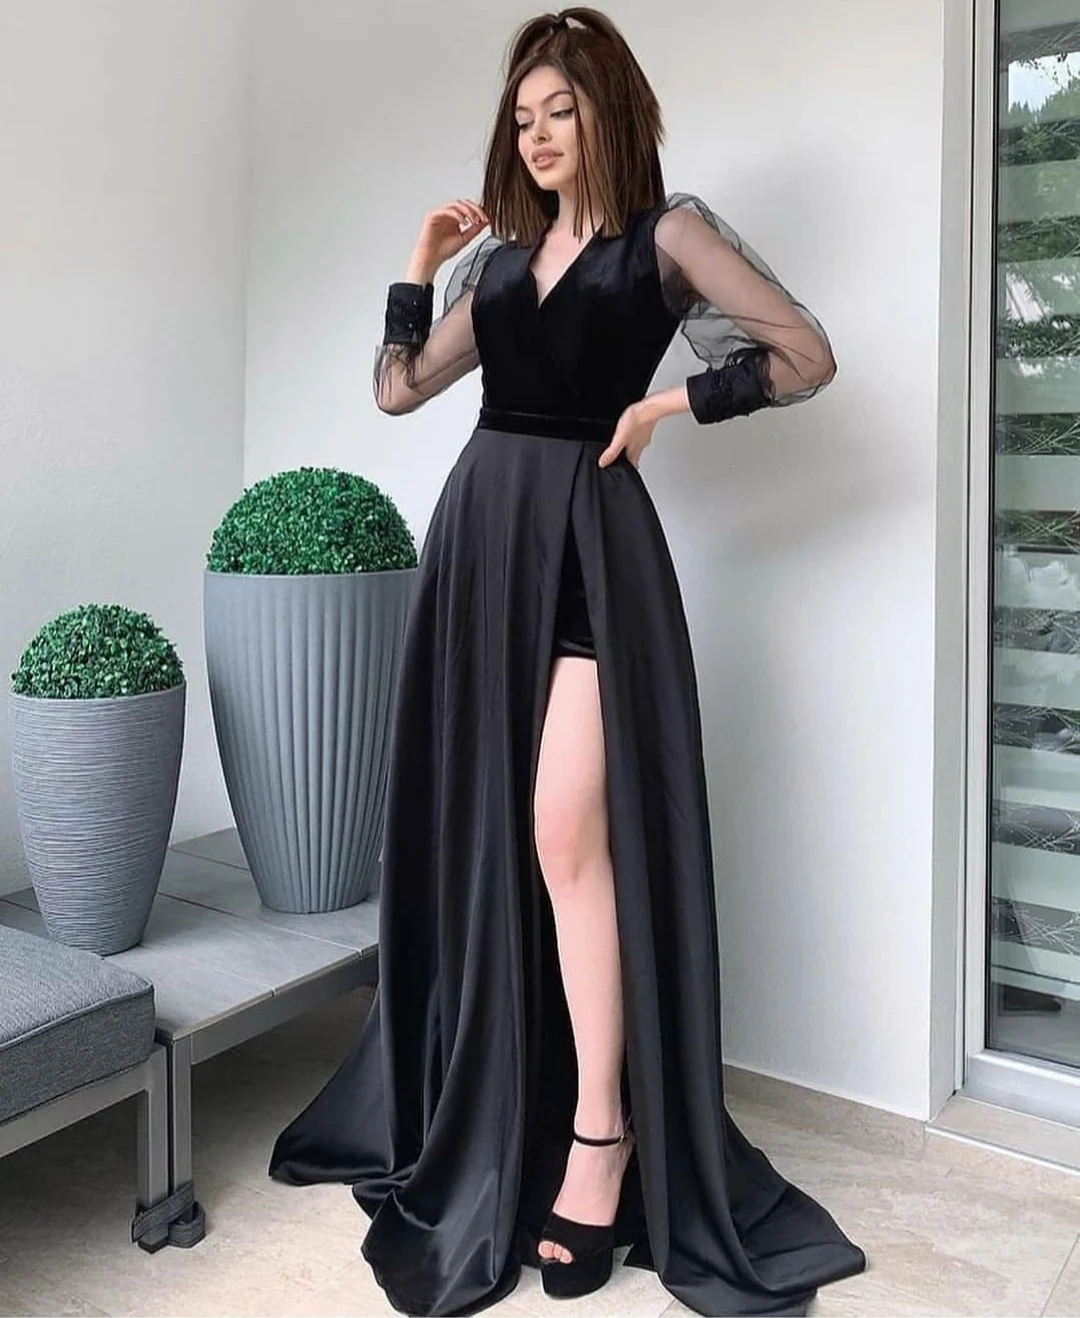 

Sexy Long Sleeve Satin Black Under skirt Prom Dresses with Slit A-Line Zipper Back Floor Length Robe De Soiree Formal Party Gown